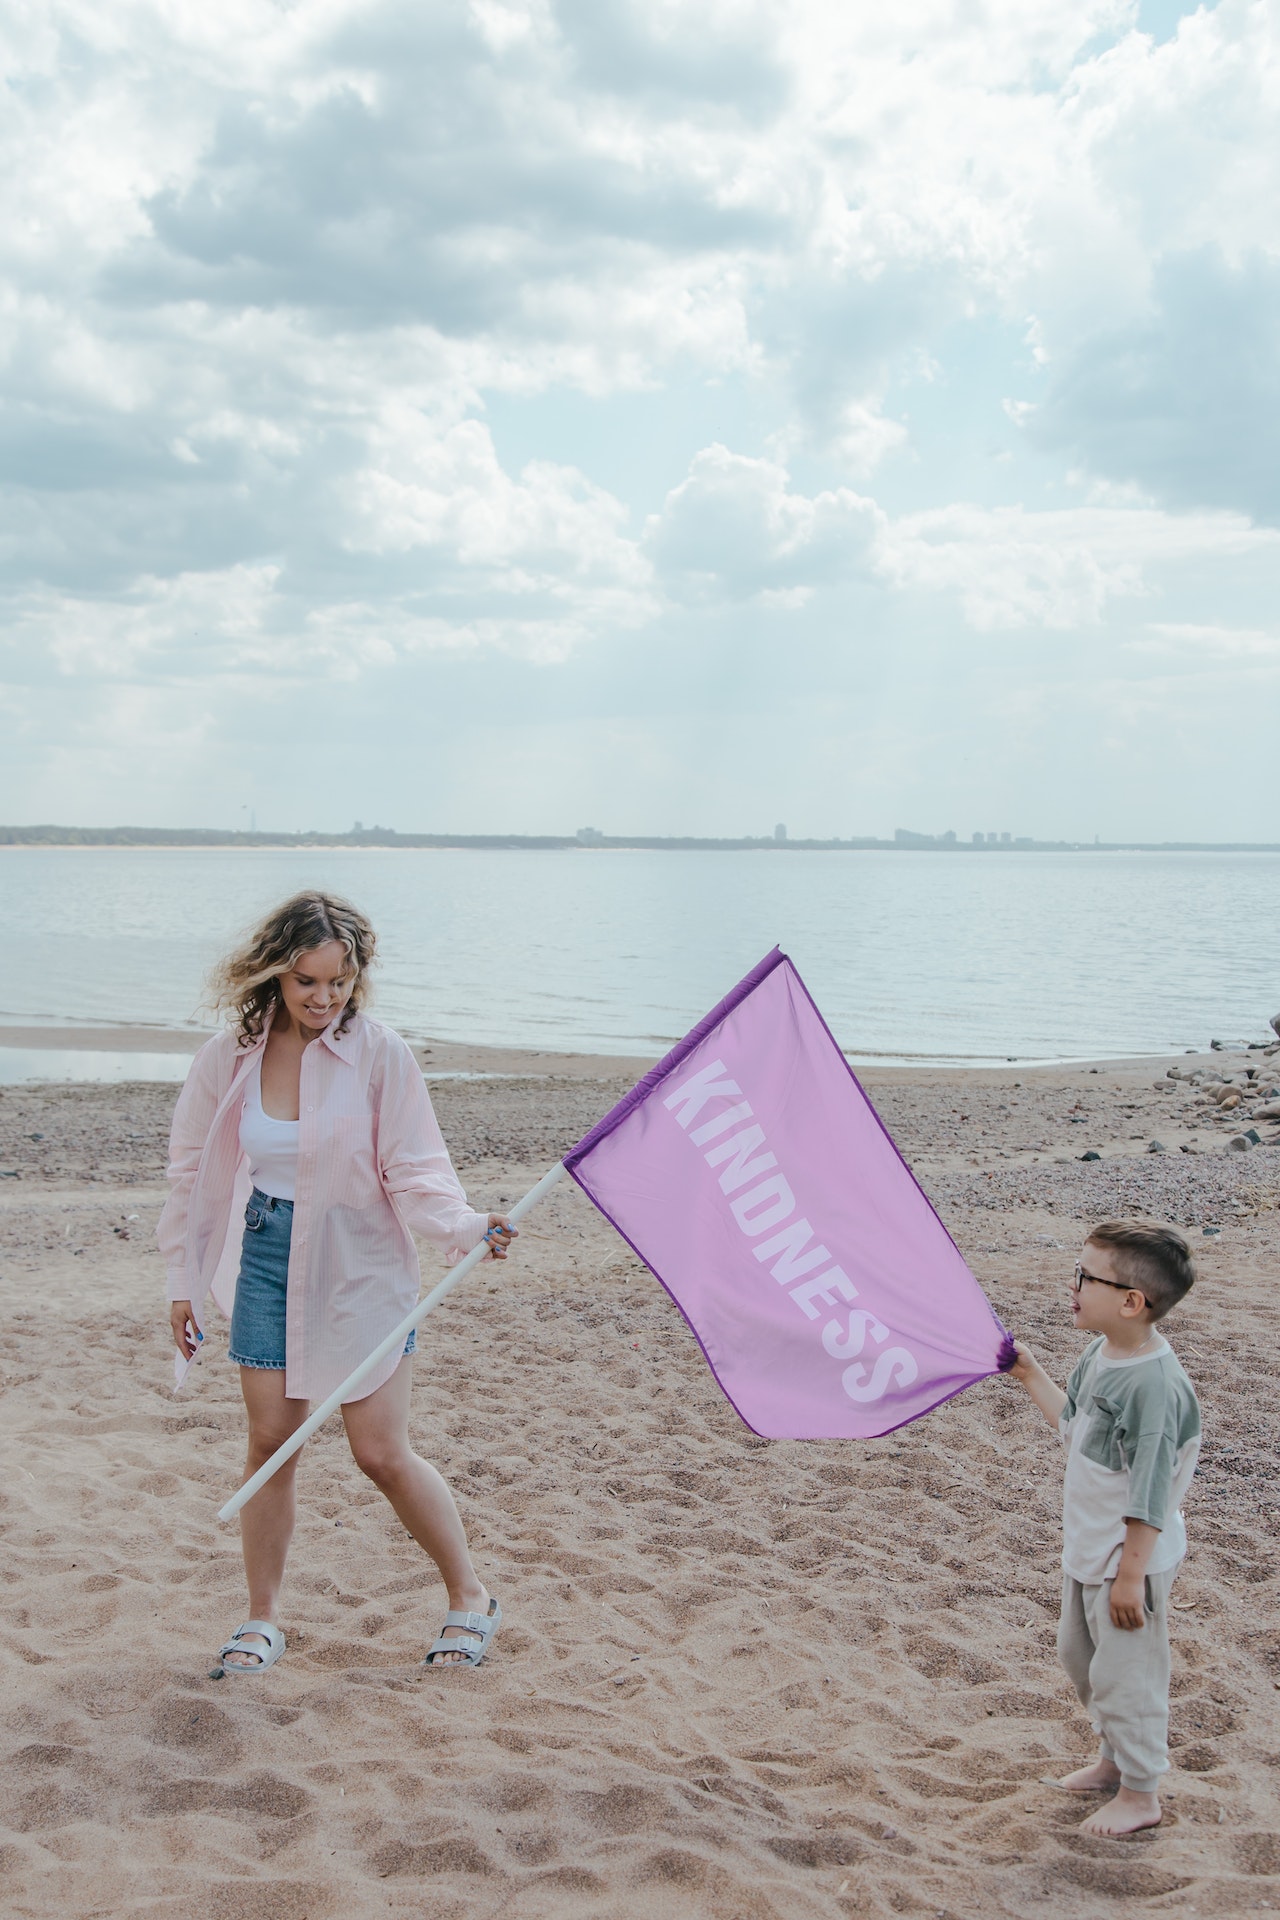 Woman in pink sleeves handing over 'kindness flag' to a kid.